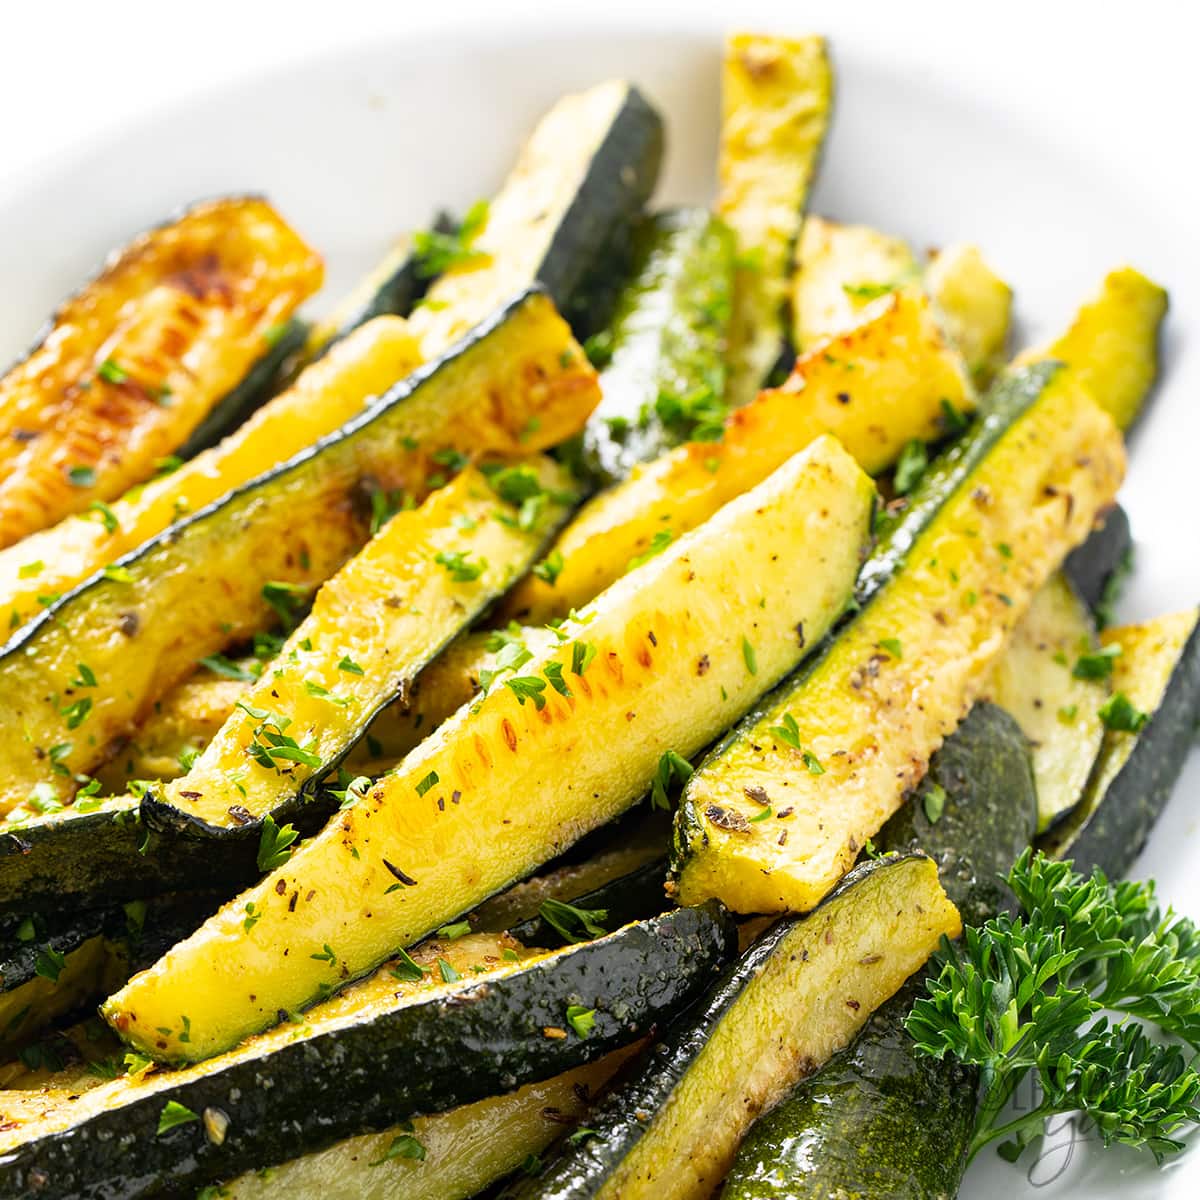 Oven Roasted Zucchini (So Easy!) from https://www.wholesomeyum.com/